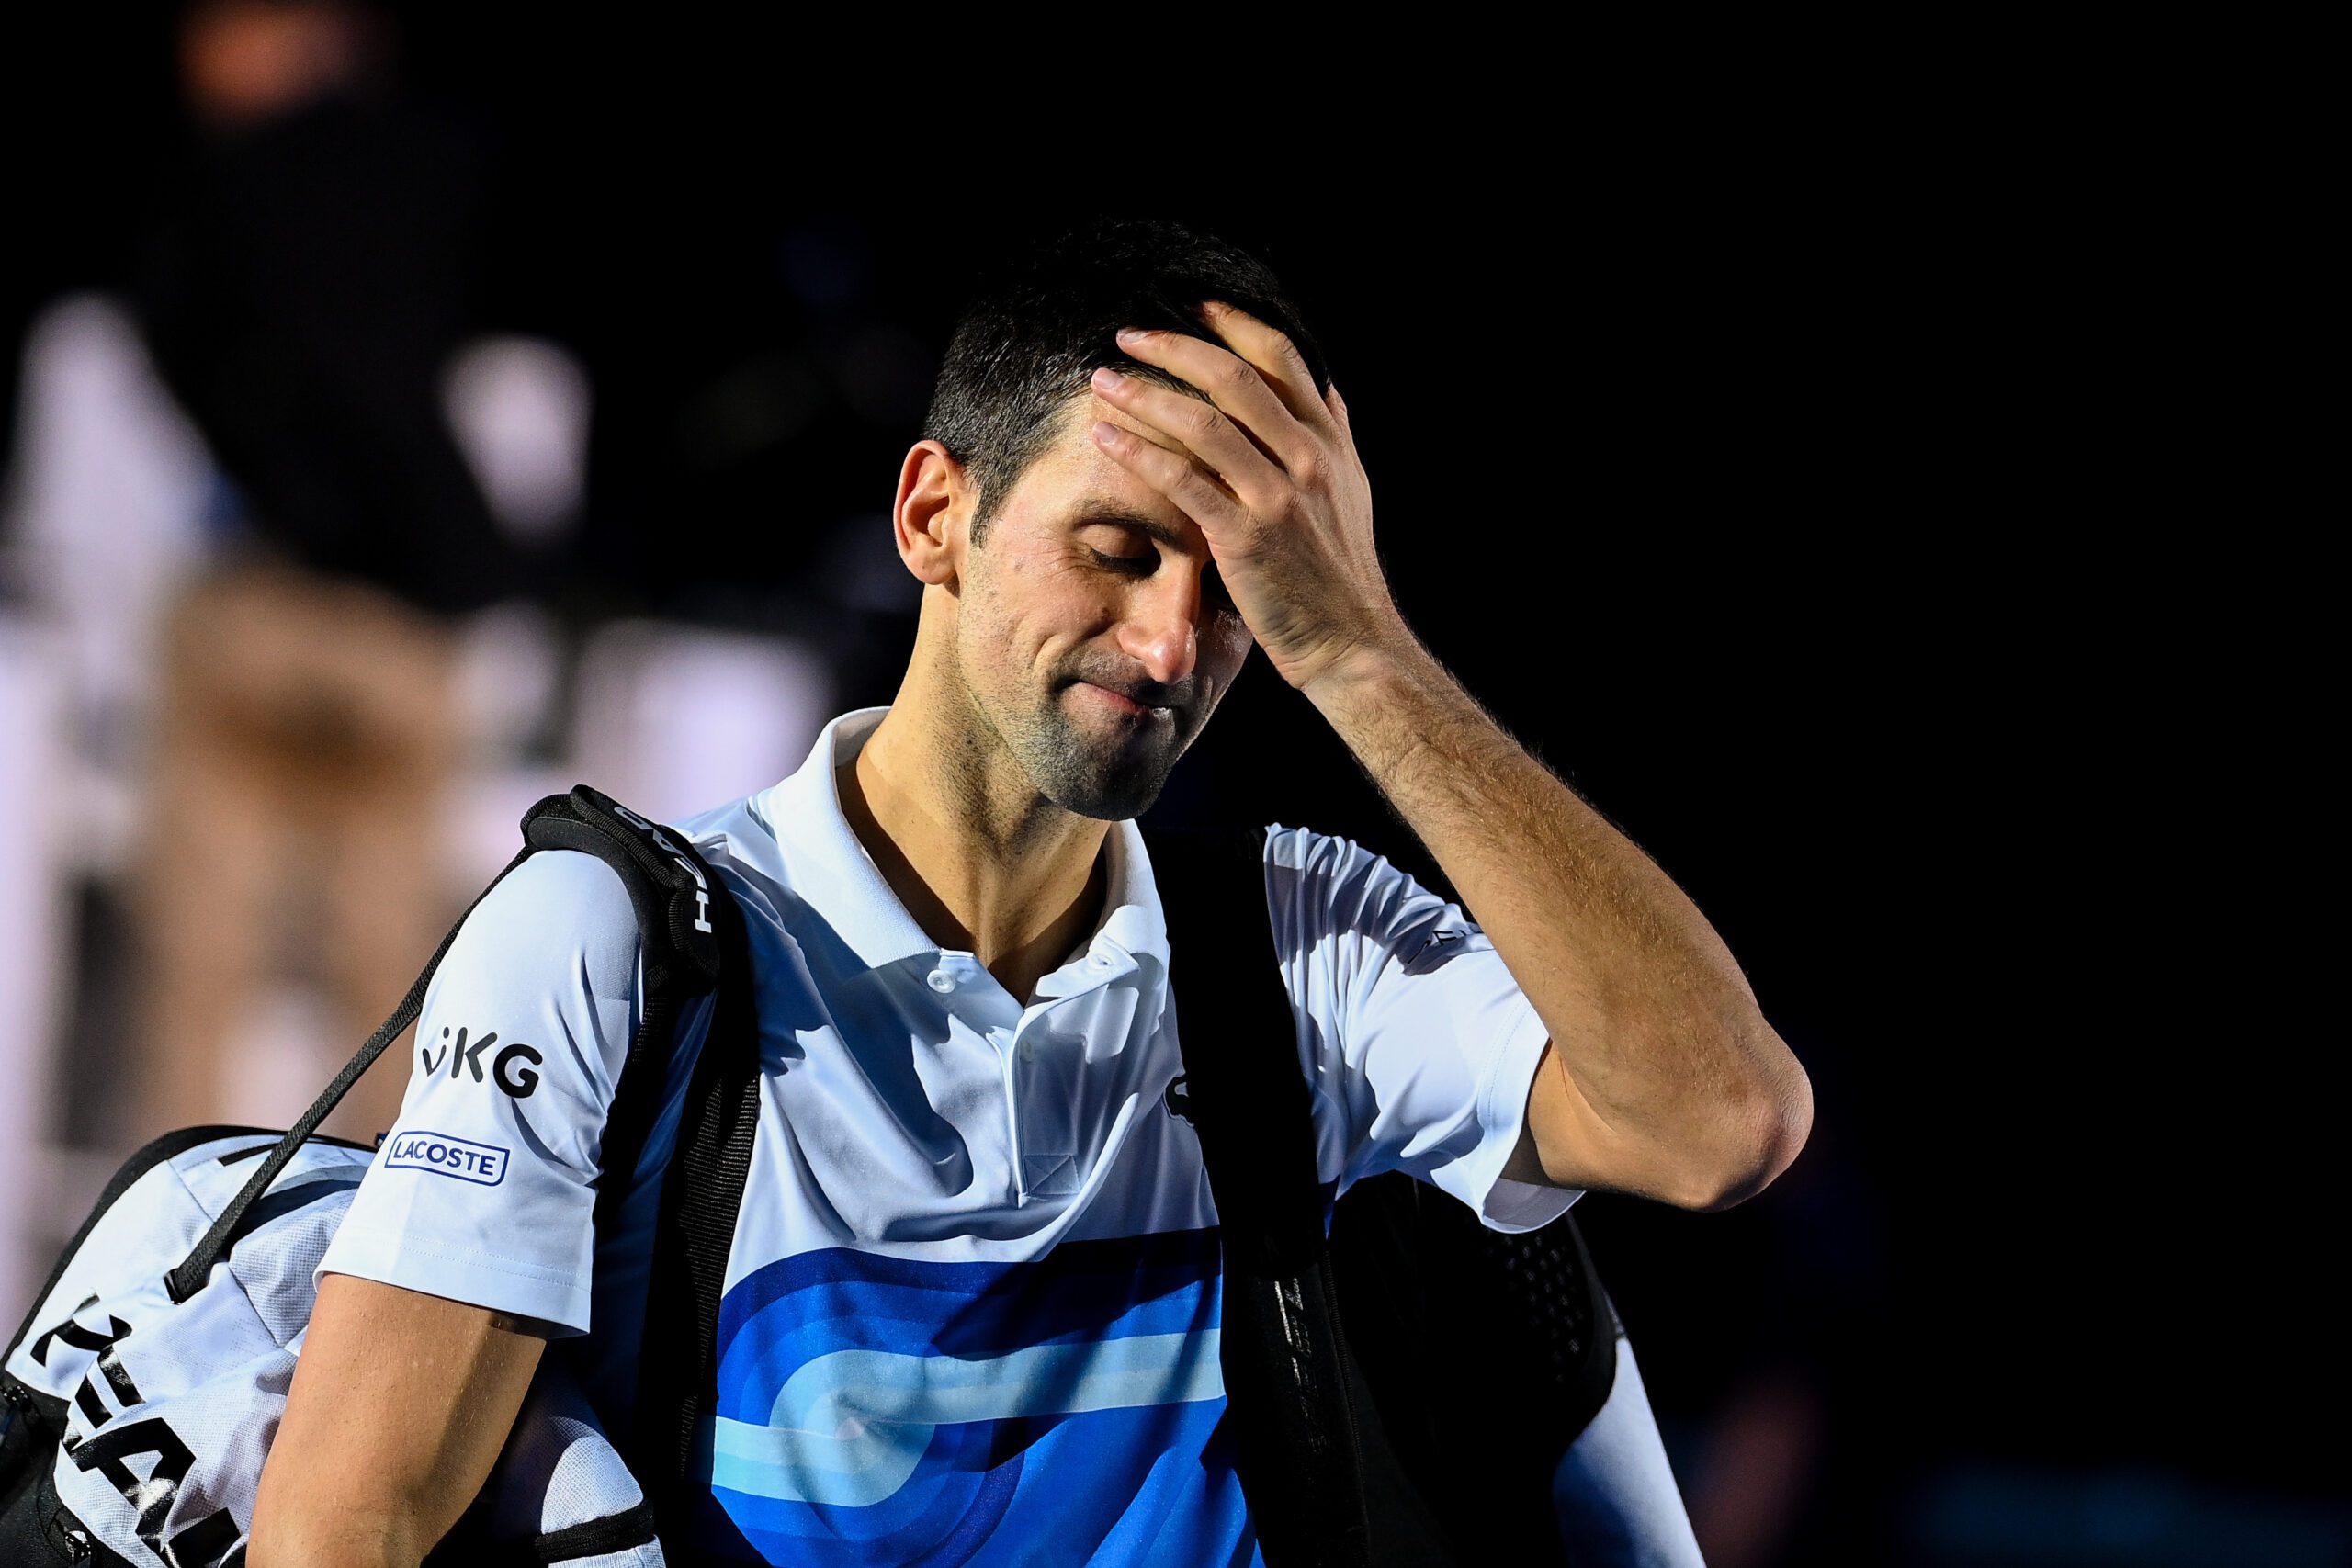 TURIN,ITALY,20.NOV.21 - TENNIS - ATP Finals. Image shows the disappointment of Novak Djokovic (SRB).